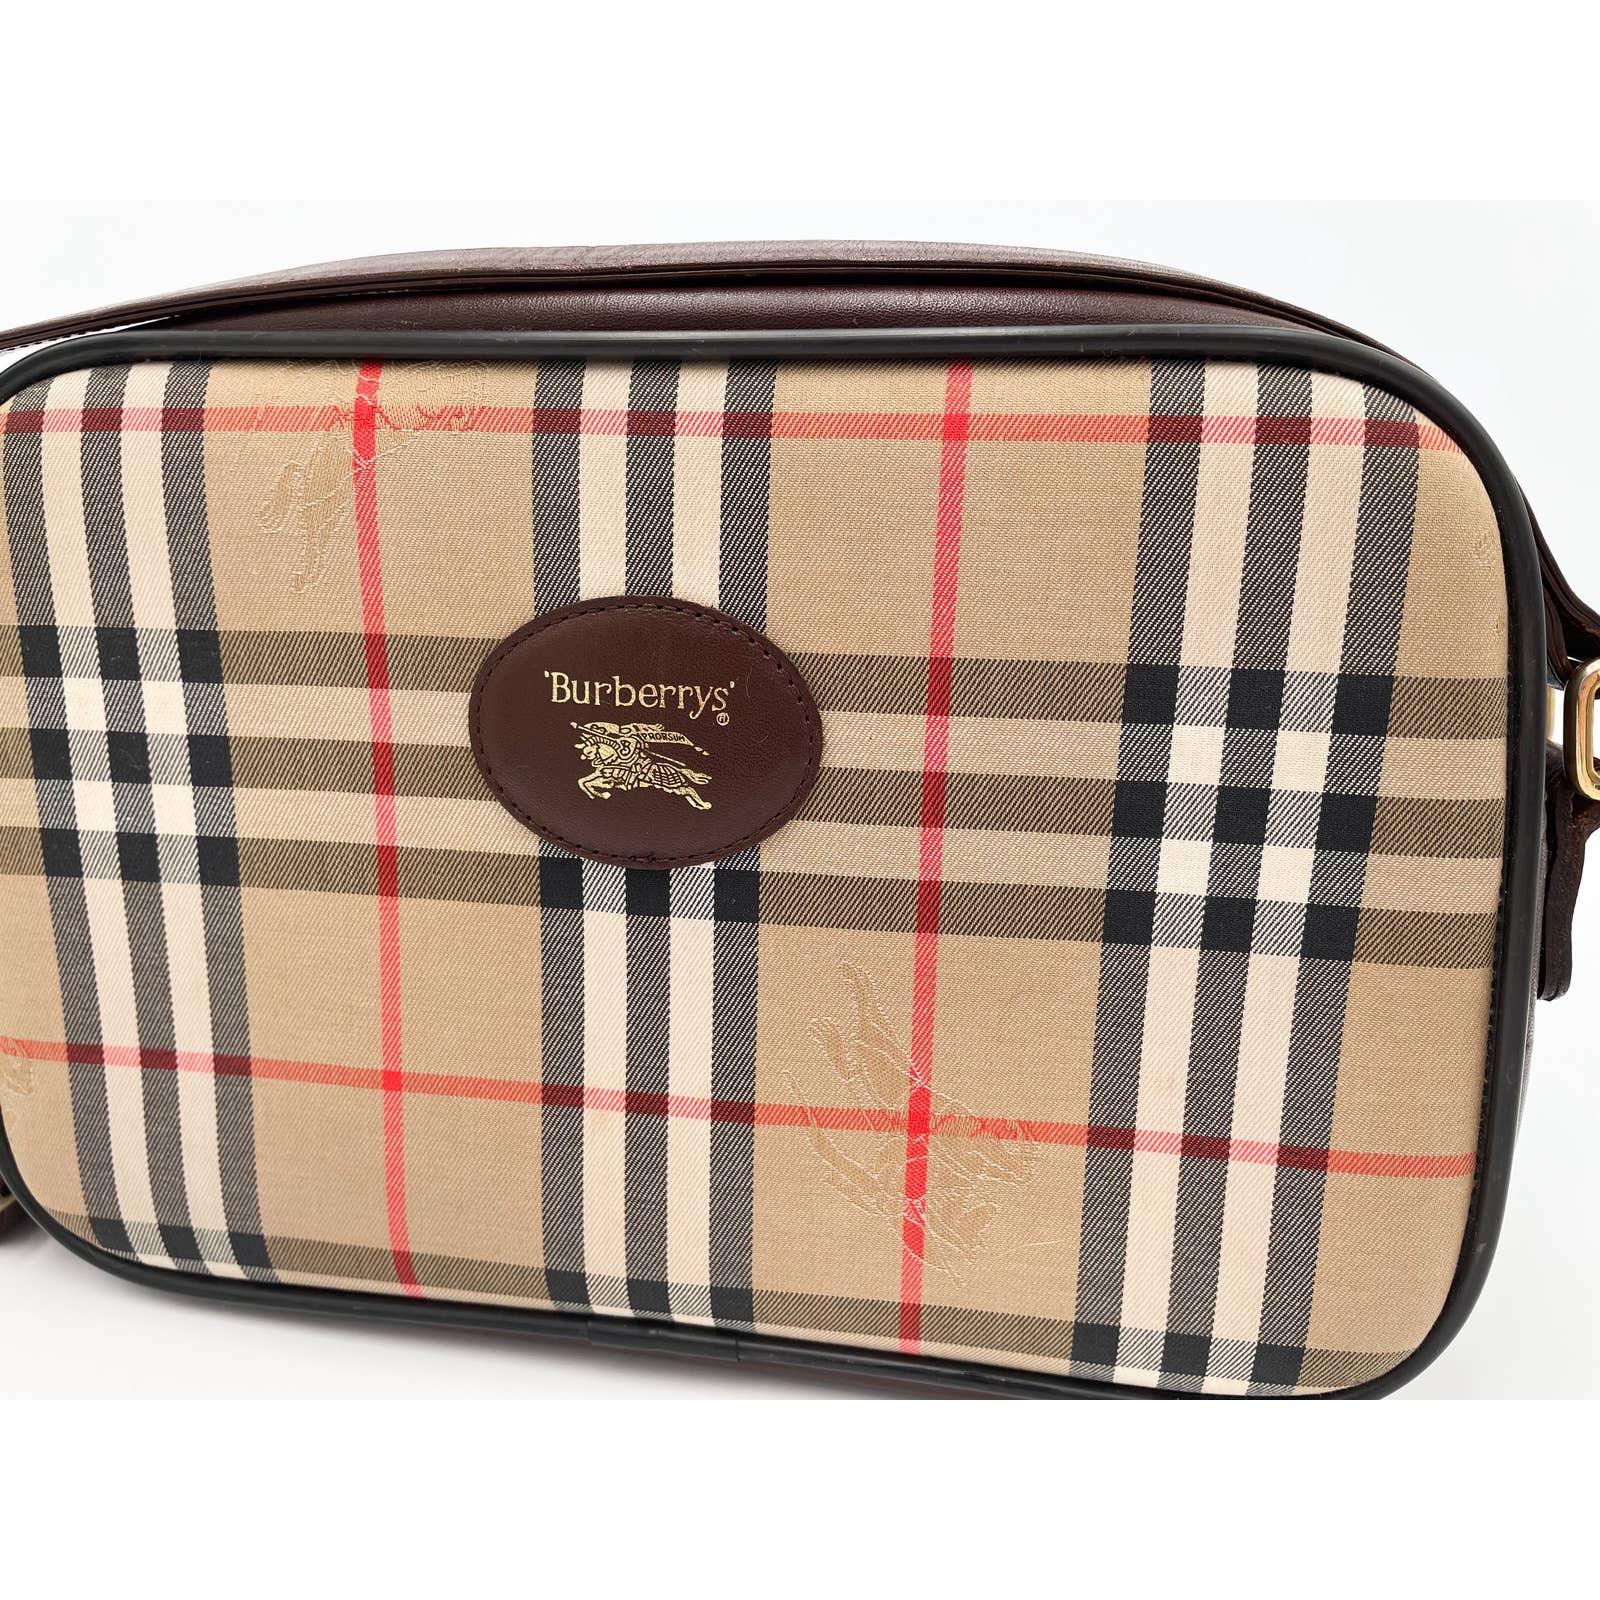 A rectangular vintage Burberry Crossbody Bag featuring the classic beige, black, white, and red plaid pattern. The center has a brown leather oval patch with gold-embossed text "Burberrys" and the equestrian knight logo. The bag has dark brown leather edges, a gold buckle, and an adjustable strap.